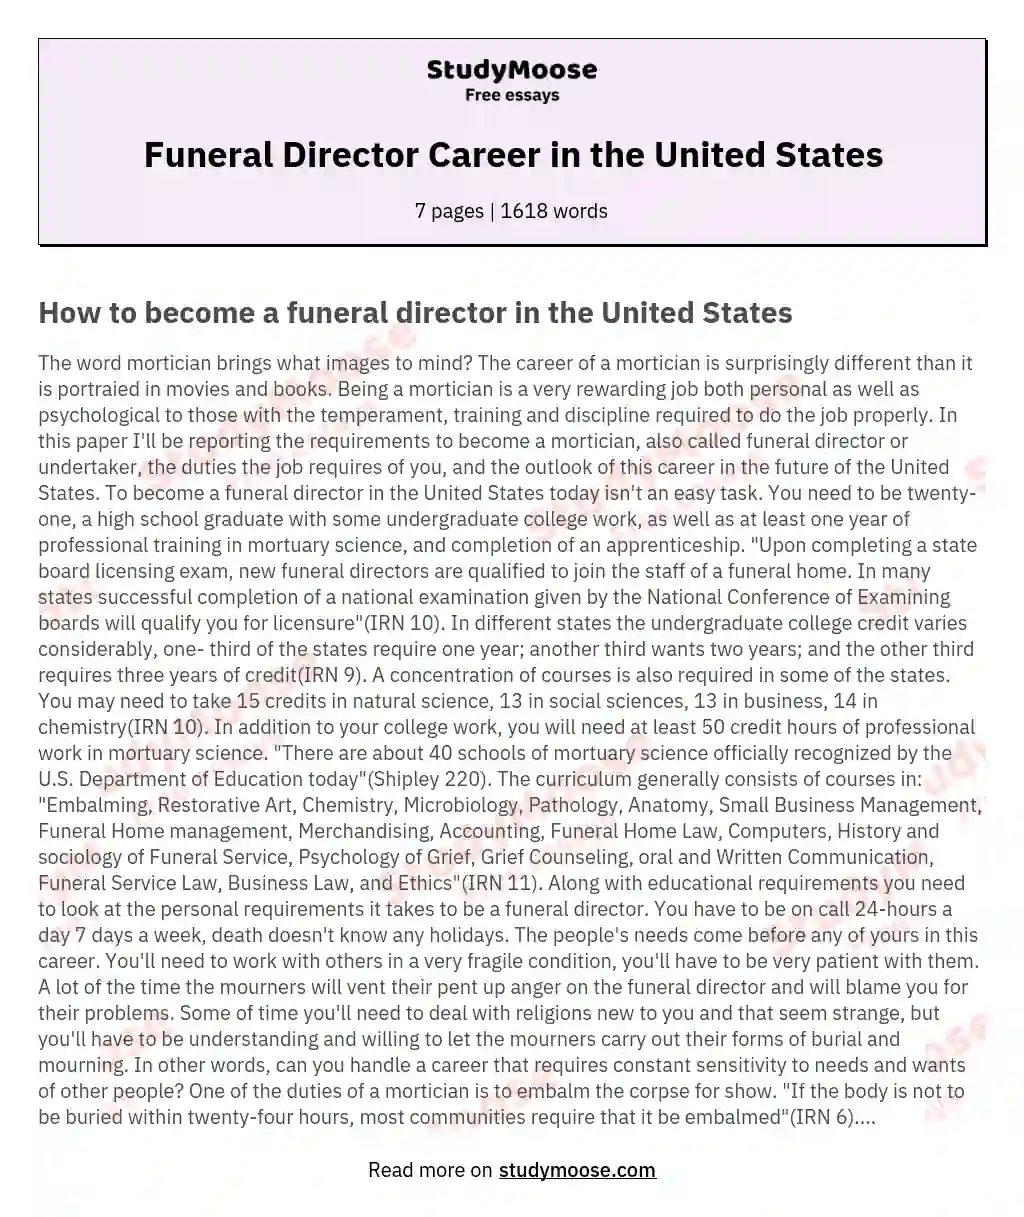 Funeral Director Career in the United States